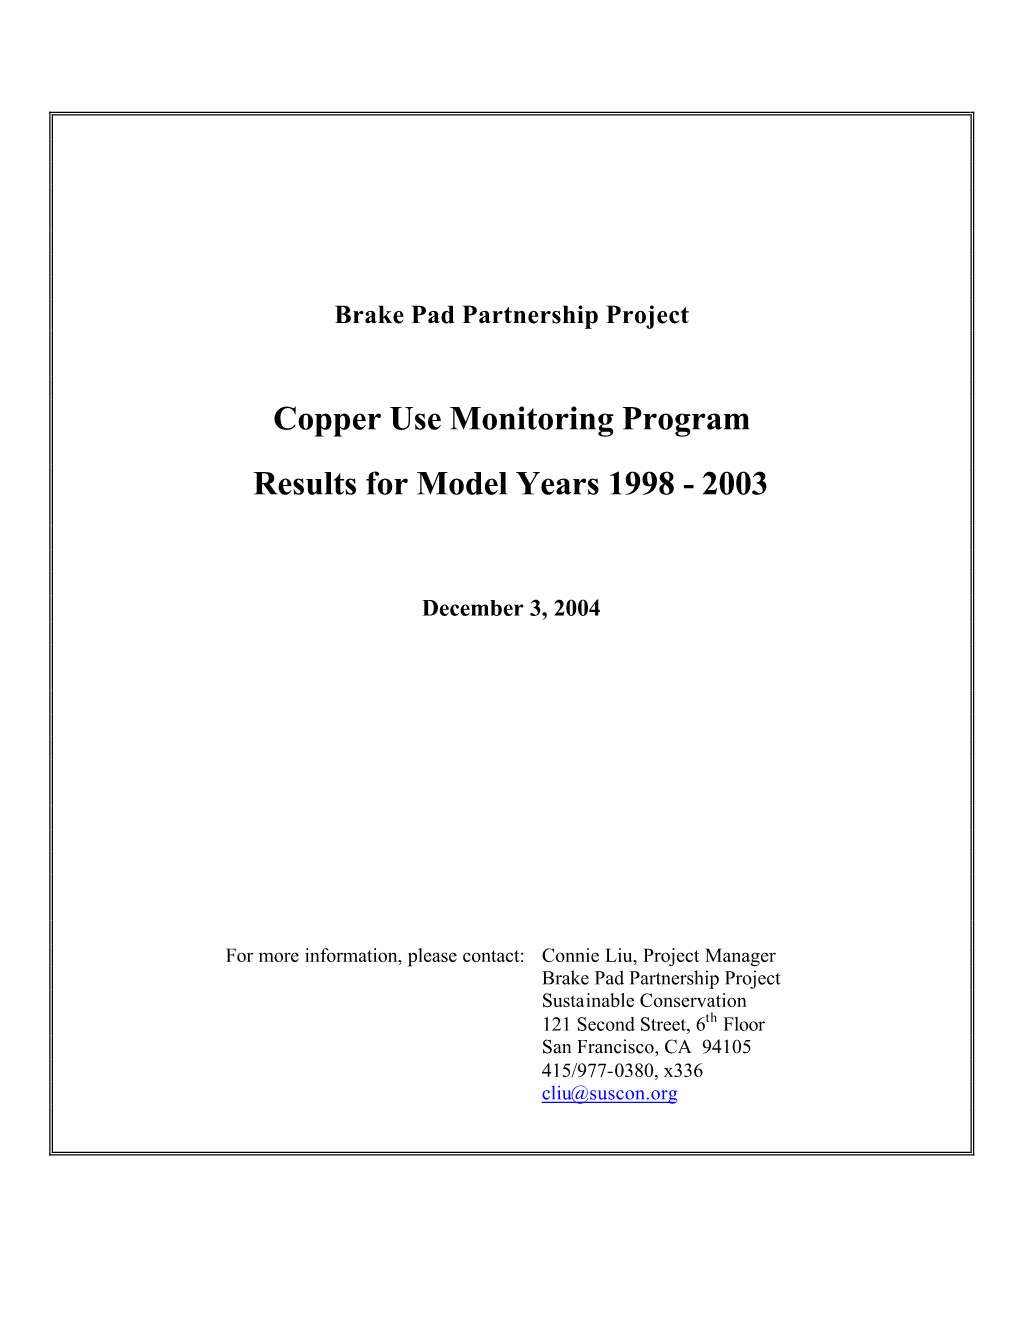 Copper Use Monitoring Program Results for Model Years 1998 - 2003 the Brake Pad Partnership December 6, 2004 Page 2